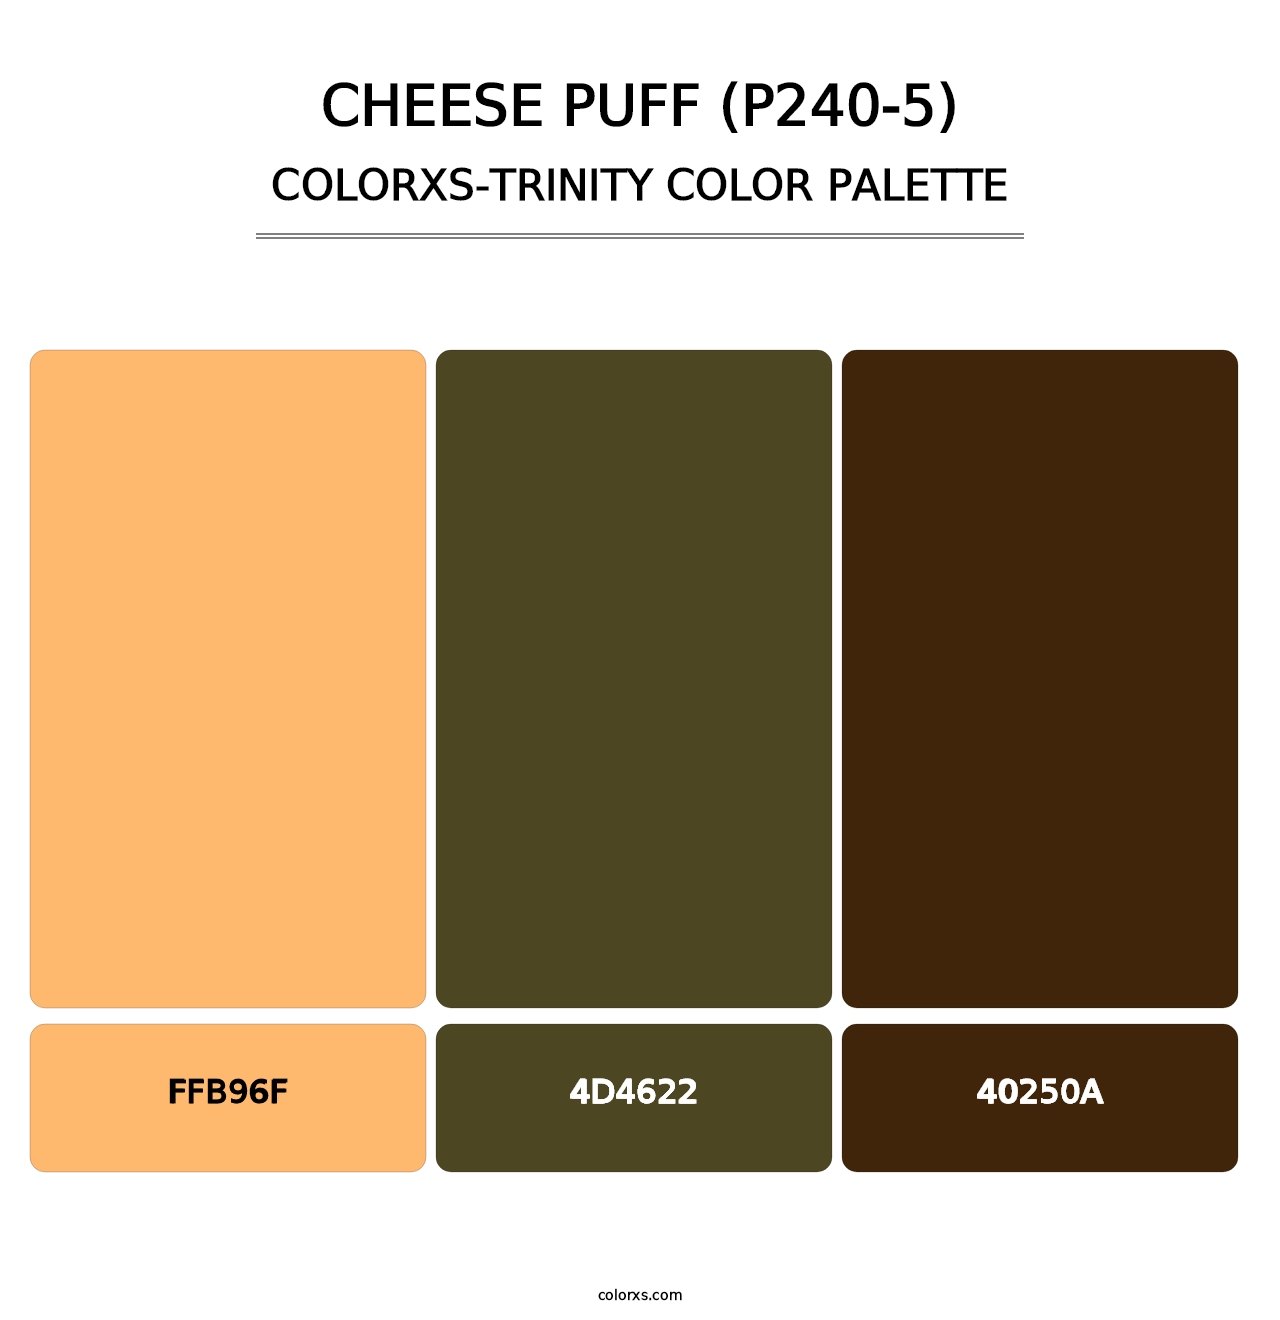 Cheese Puff (P240-5) - Colorxs Trinity Palette